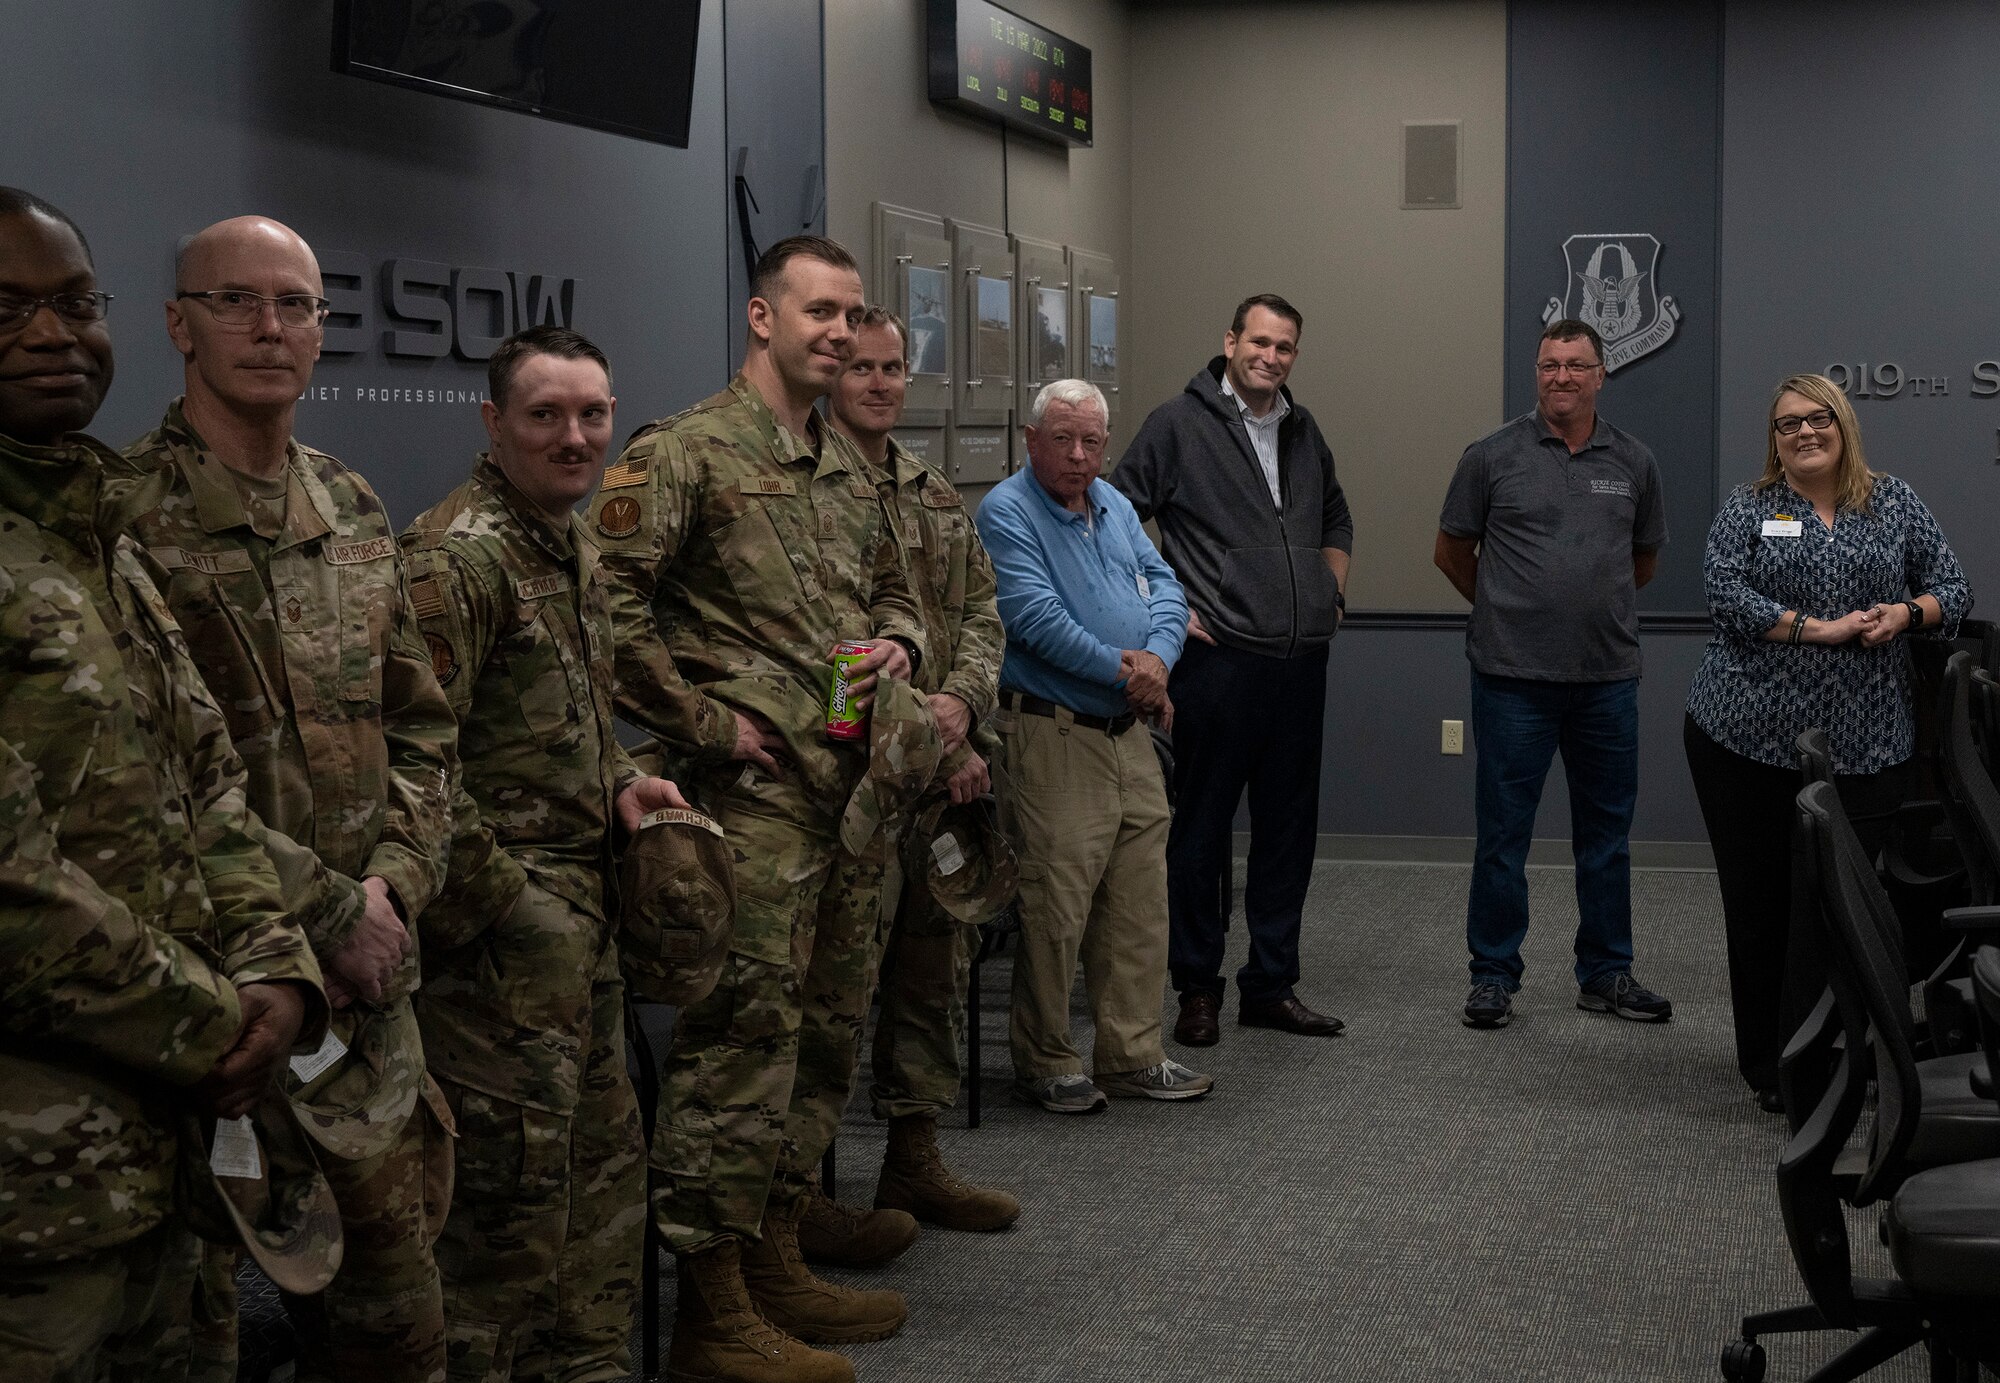 Airmen and local Navarre group stand in a room and chat